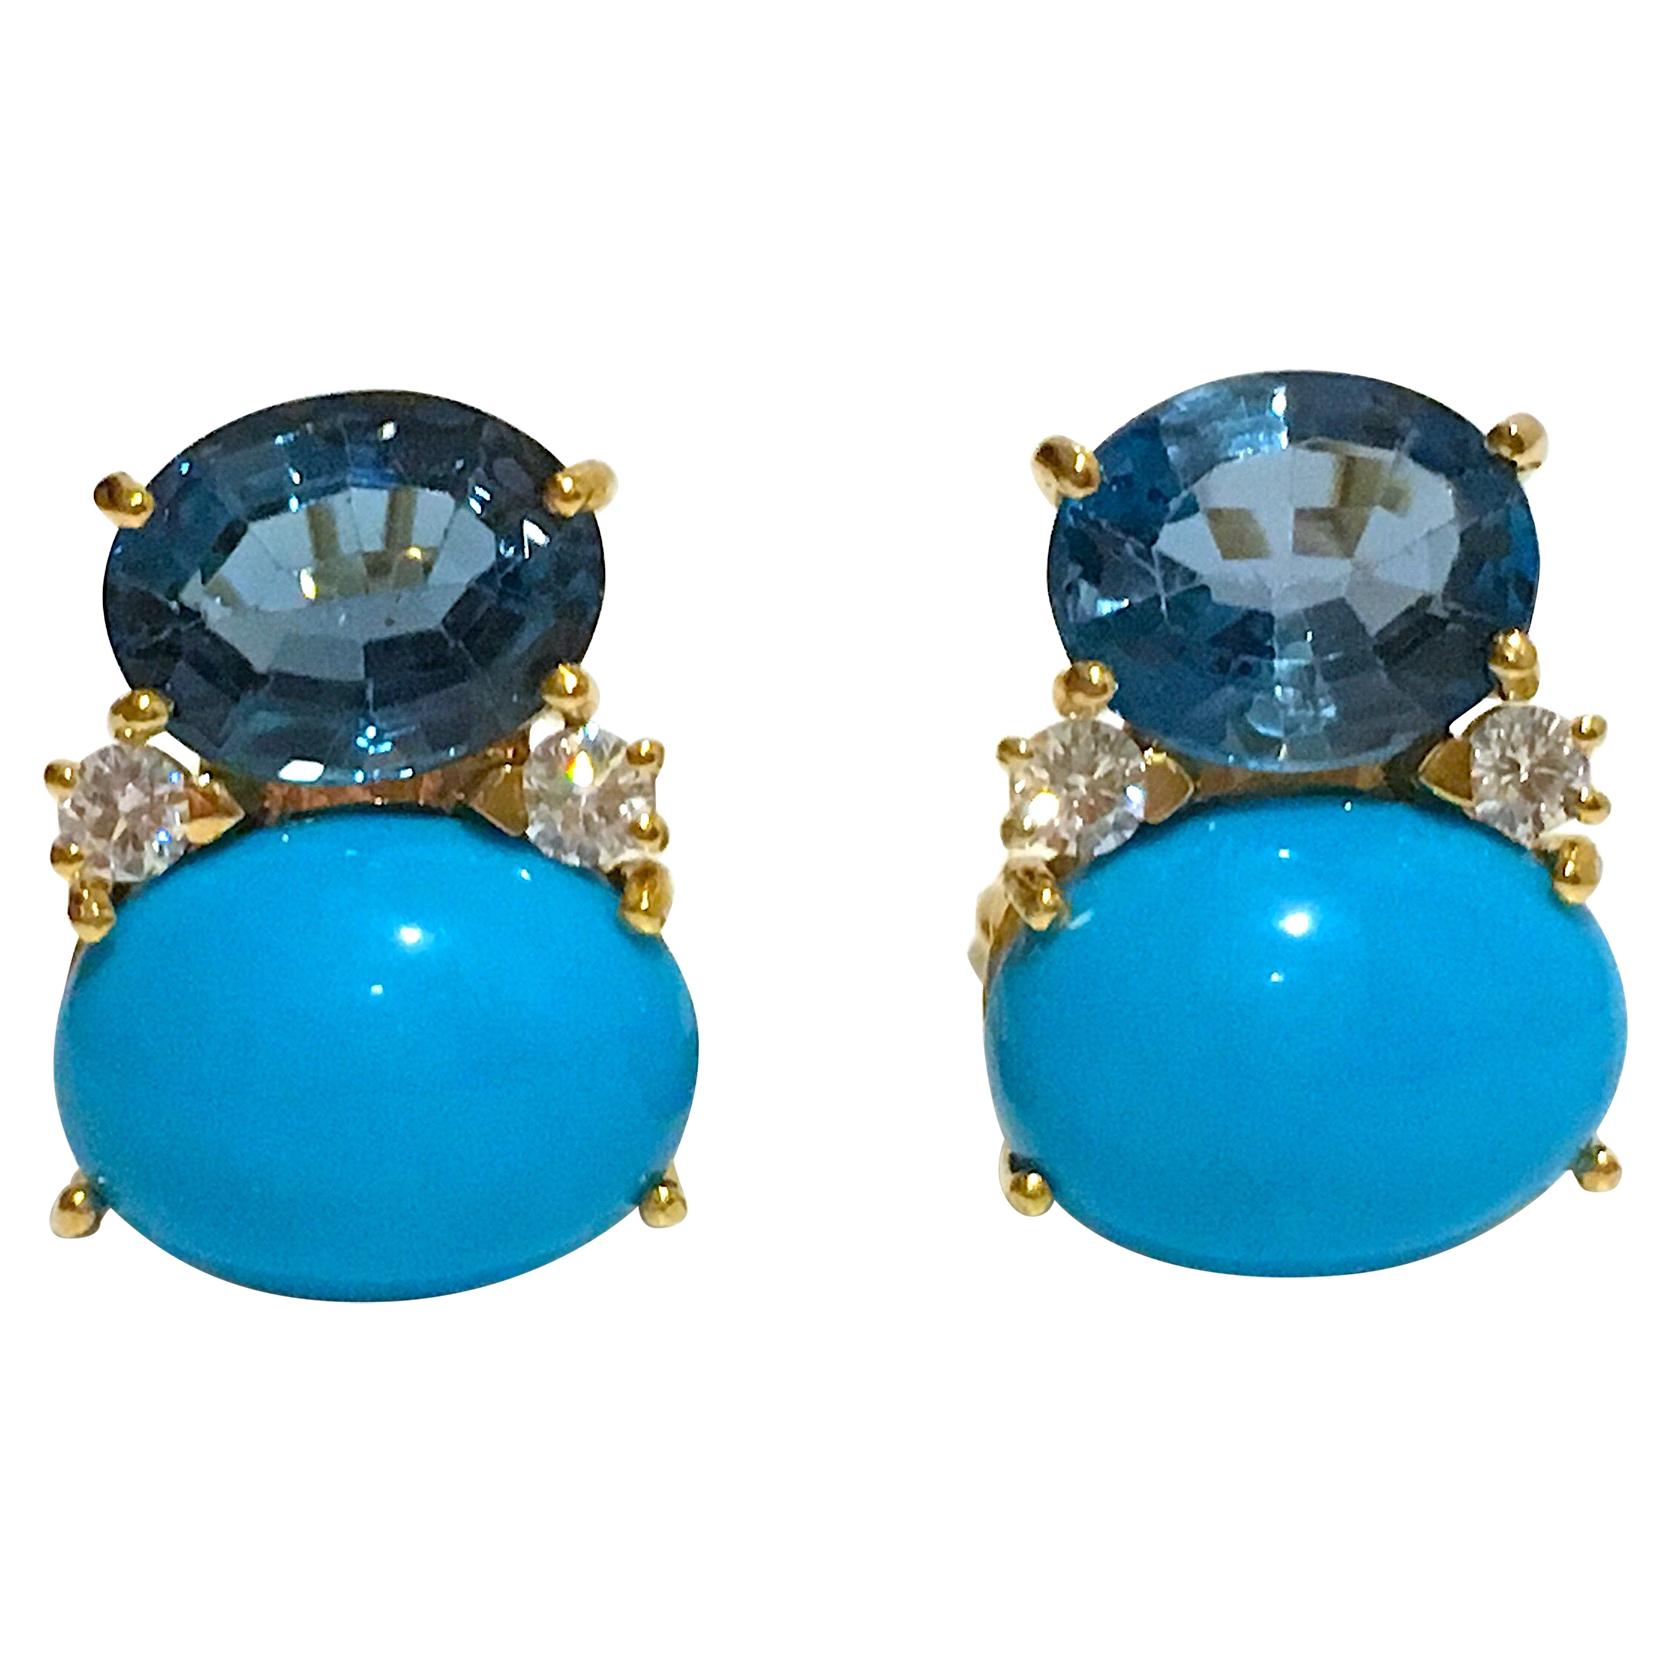 Large Gum Drop Earrings with Blue Topaz, Turquoise and Diamonds Clip or Pierced